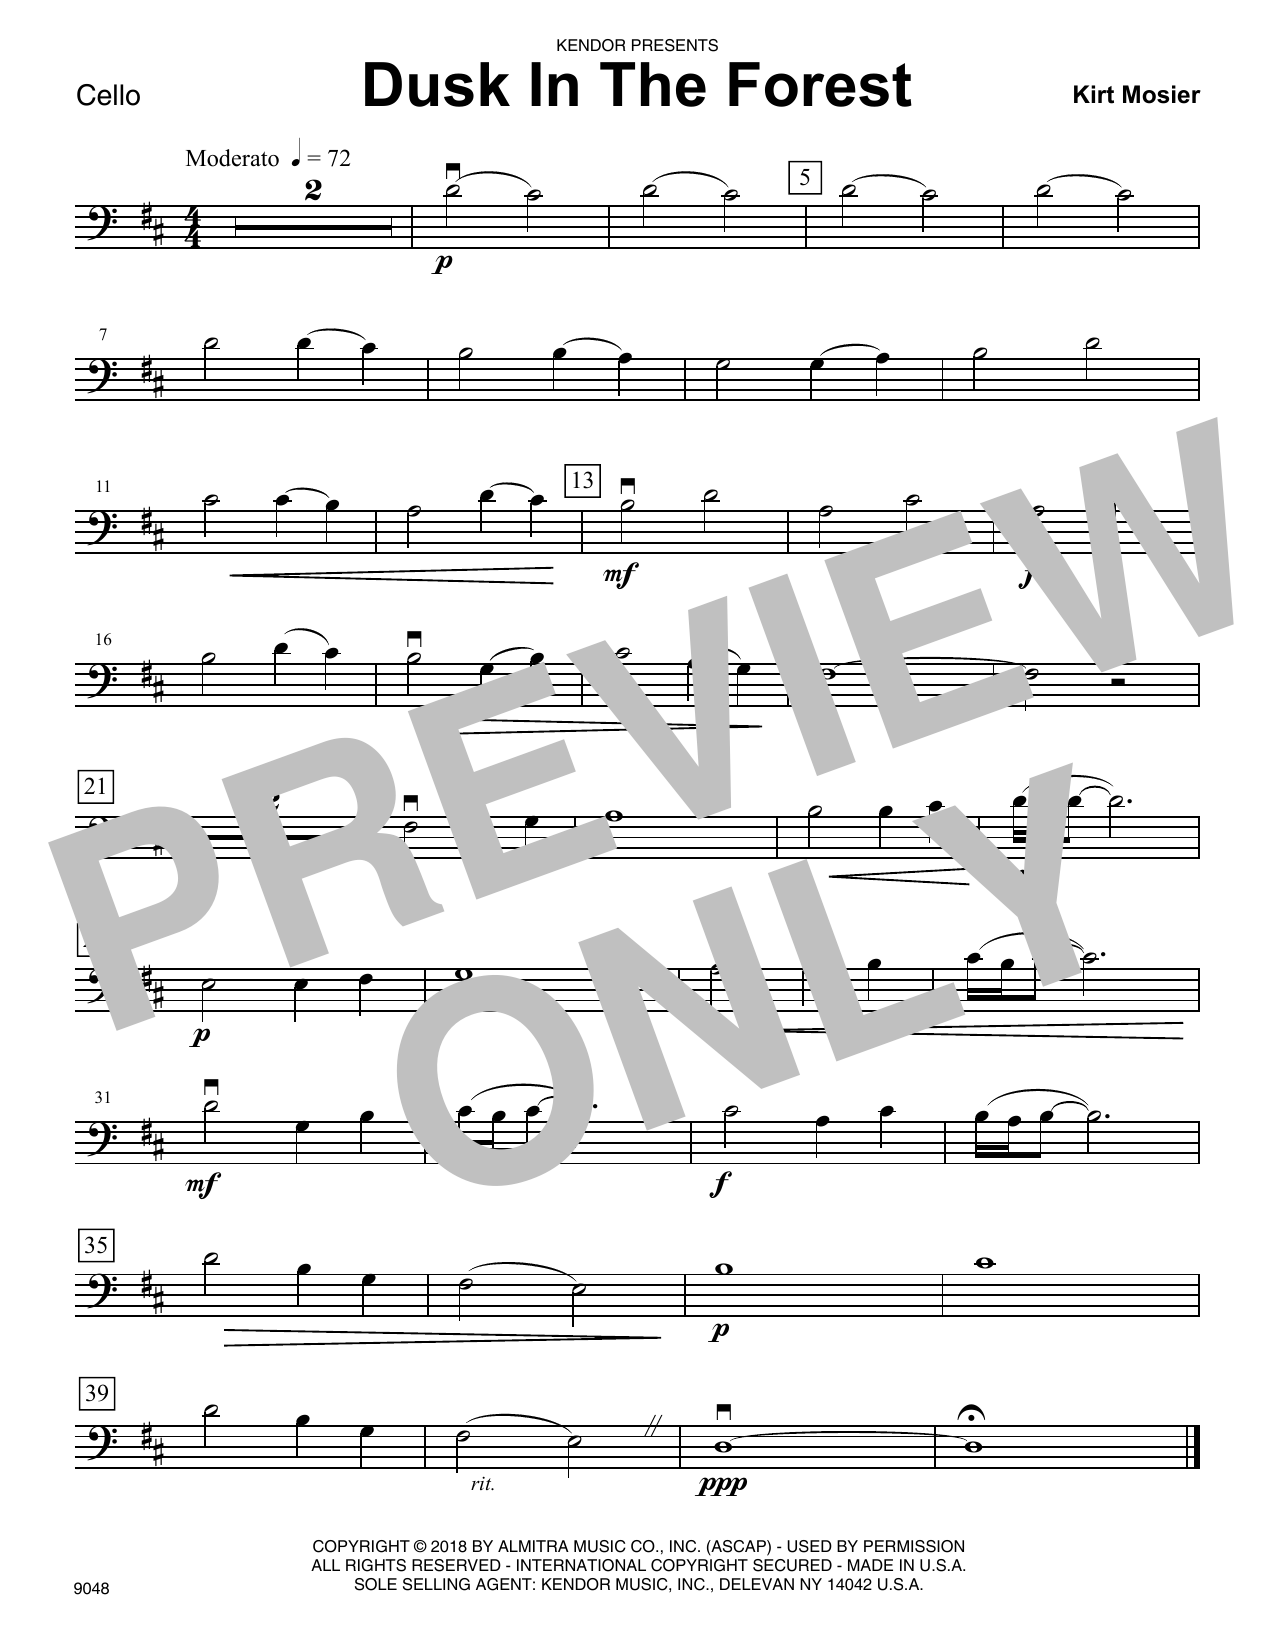 Download Kirt Mosier Dusk In The Forest - Cello Sheet Music